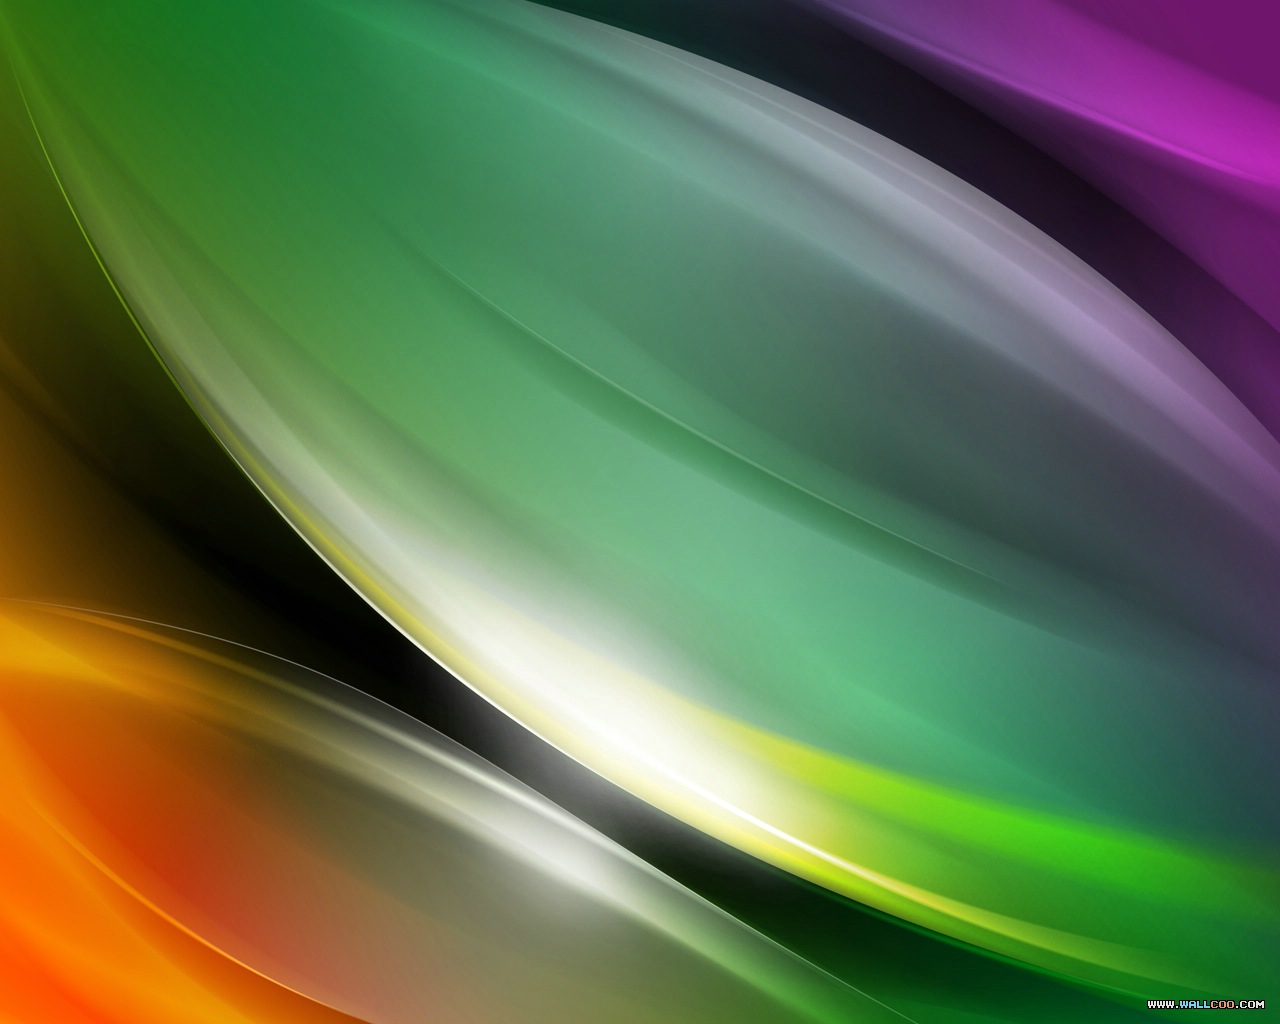 Apple Imac Colorful Abstract No Desktop High Resolution Background